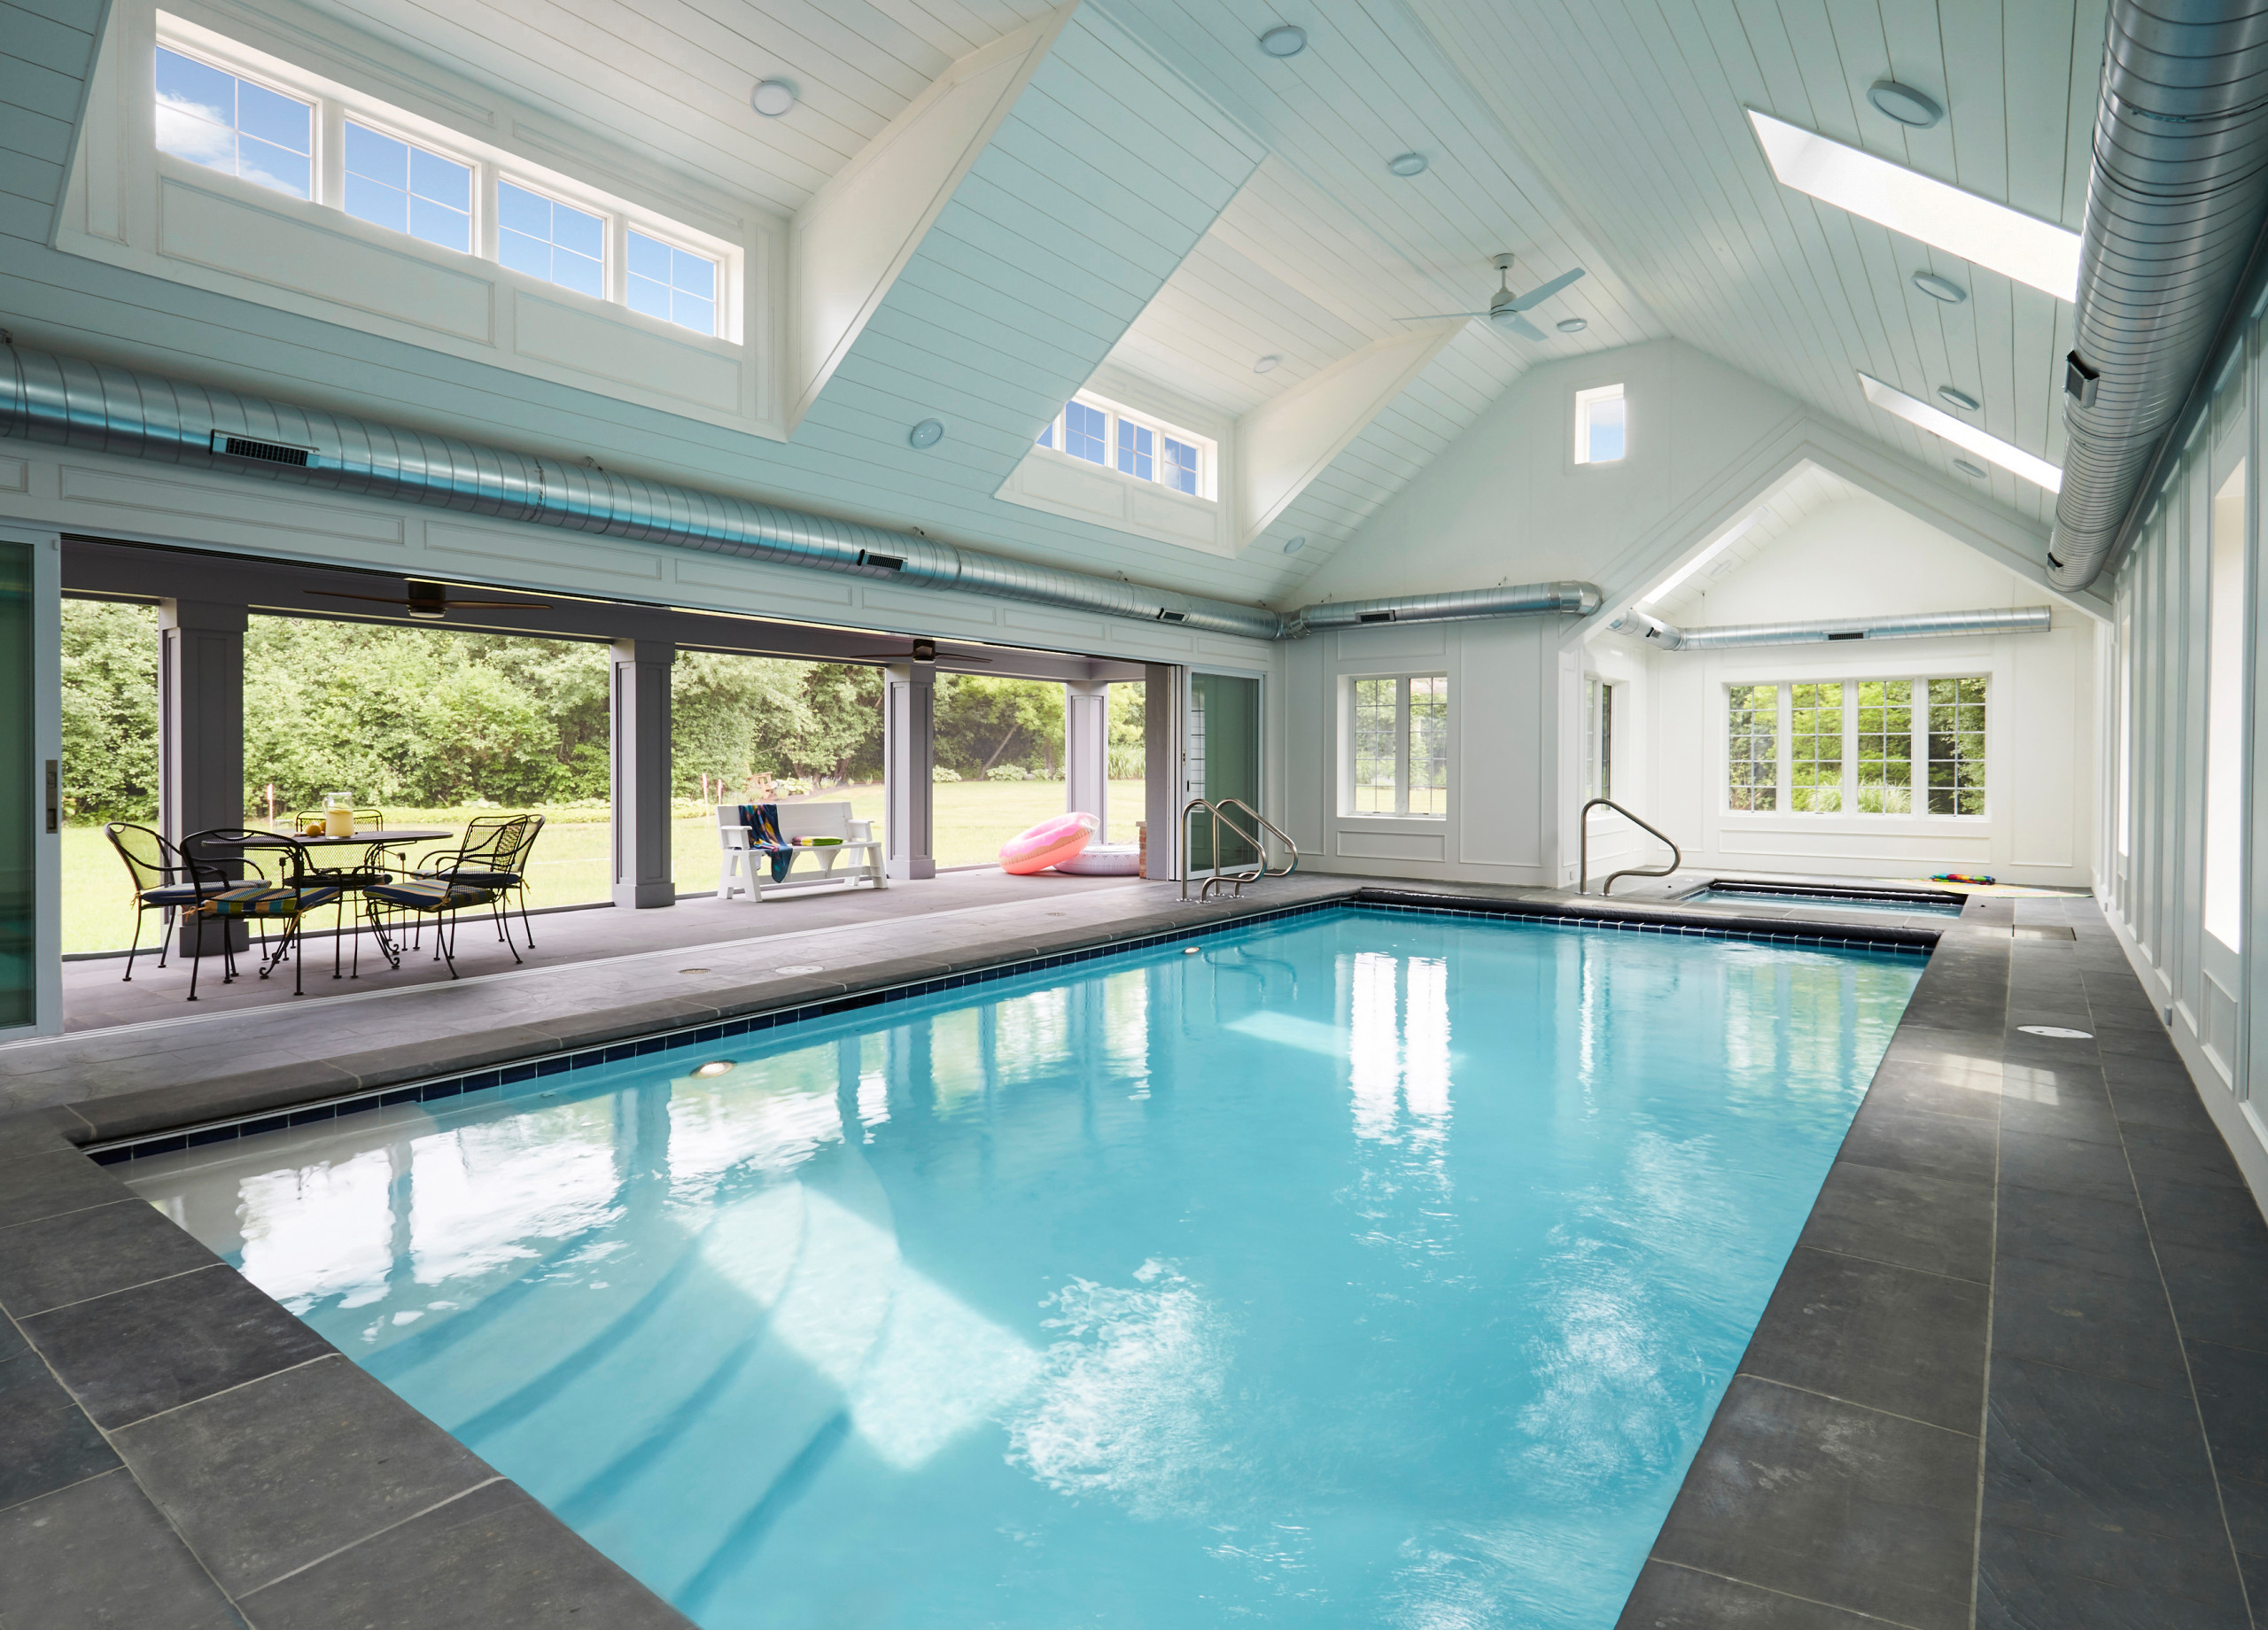 Lake Forest Pool House - LaCantina Doors Open